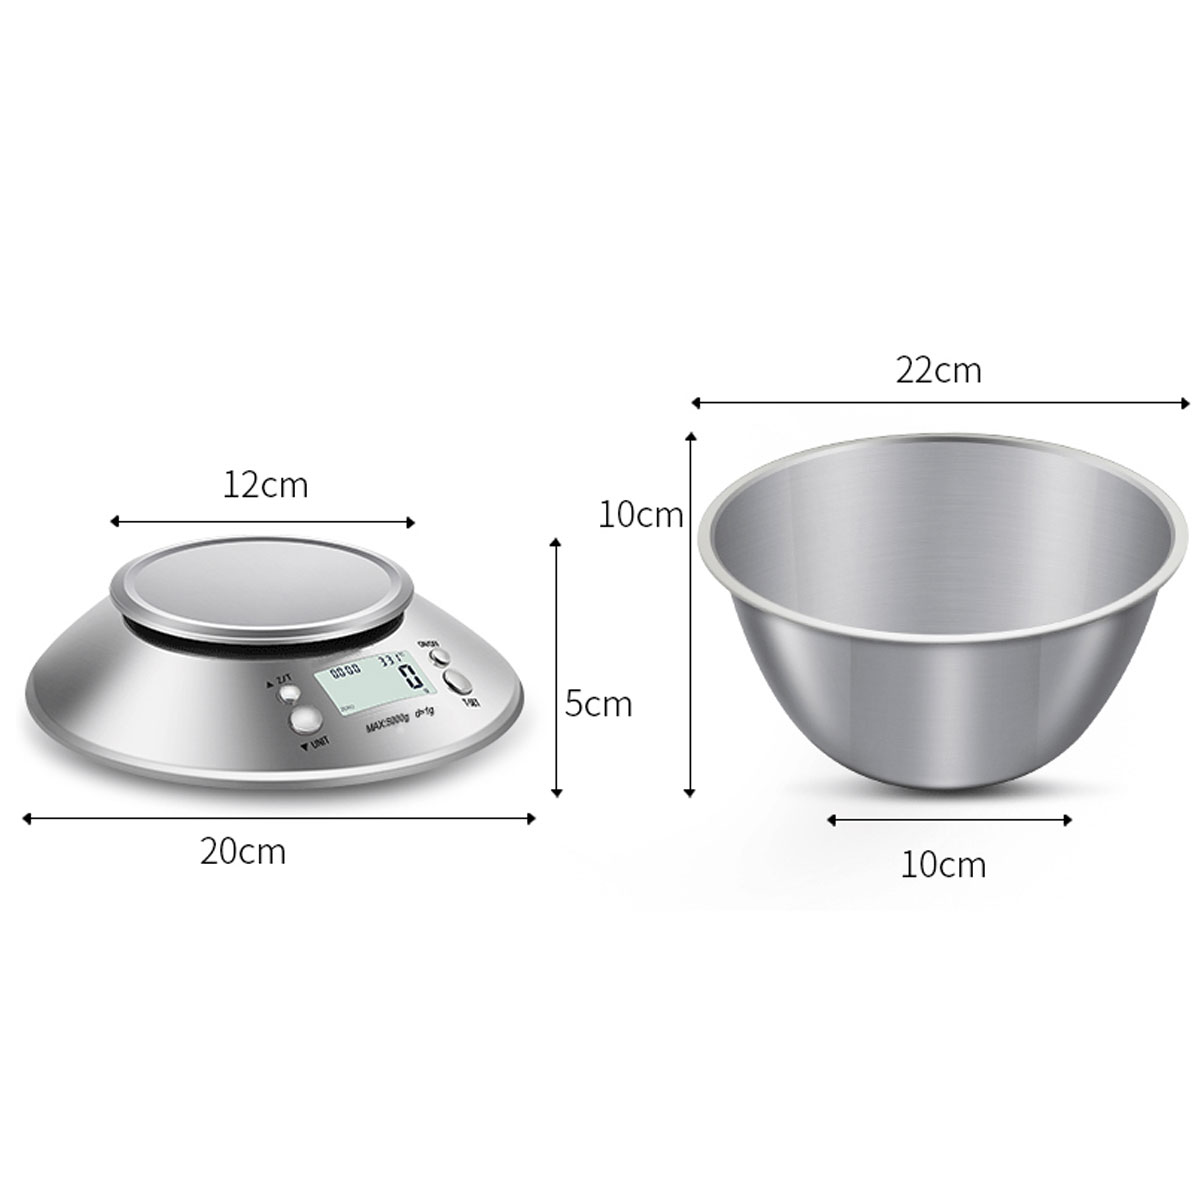 Digital-Kitchen-Scale-LCD-Display-Stainless-Steel-Baking-High-Precision-Removable-Kitchen-Scale-1859940-17